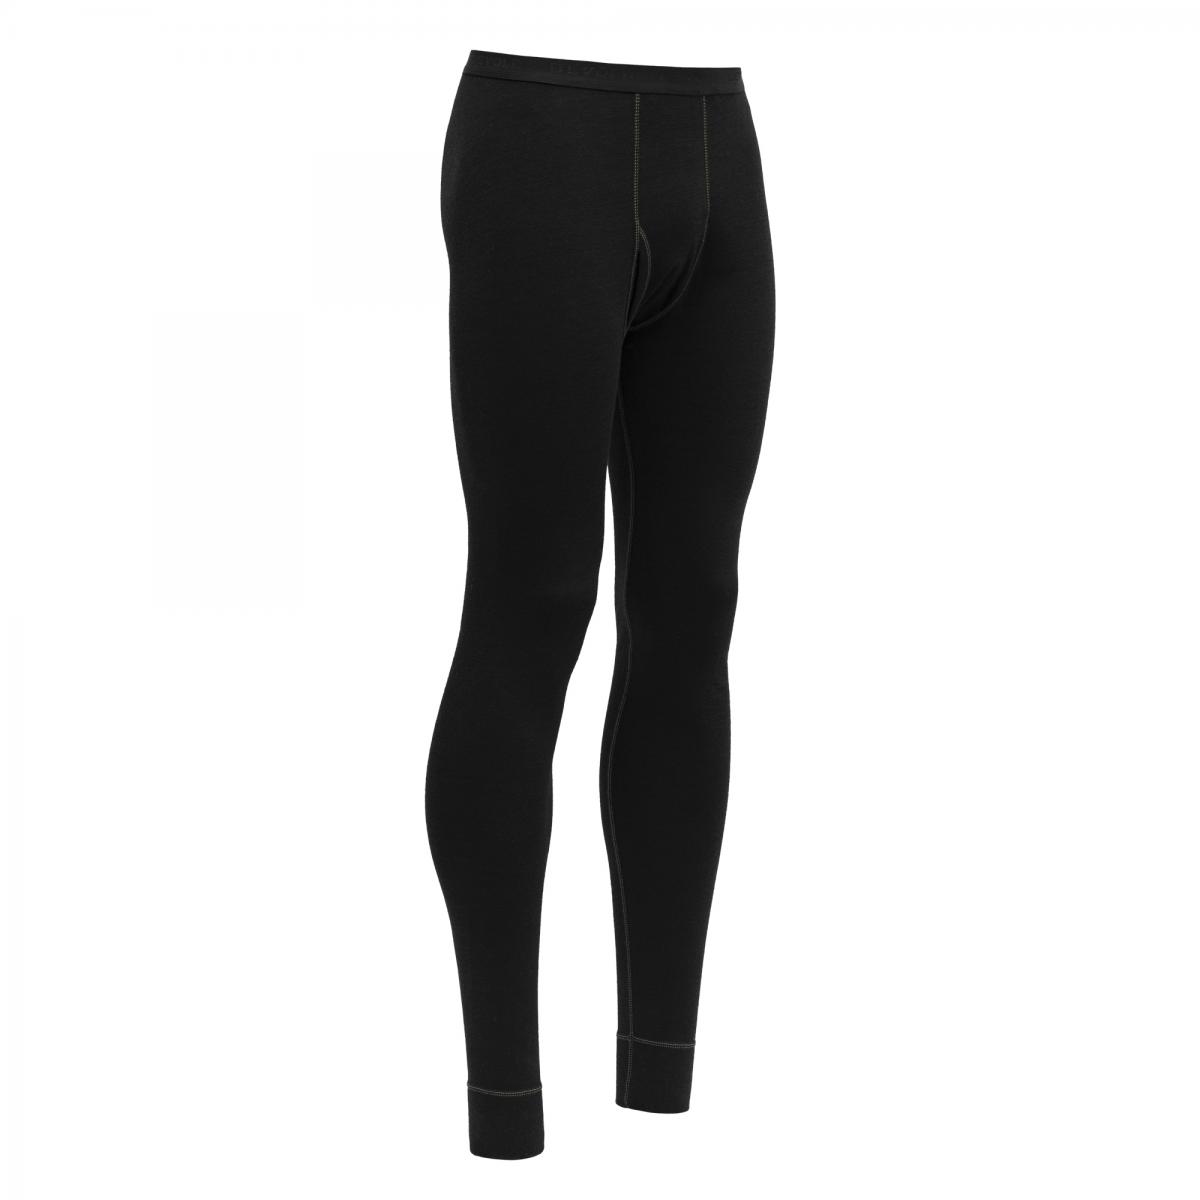 Devold Expedition Long Johns w/fly, Black